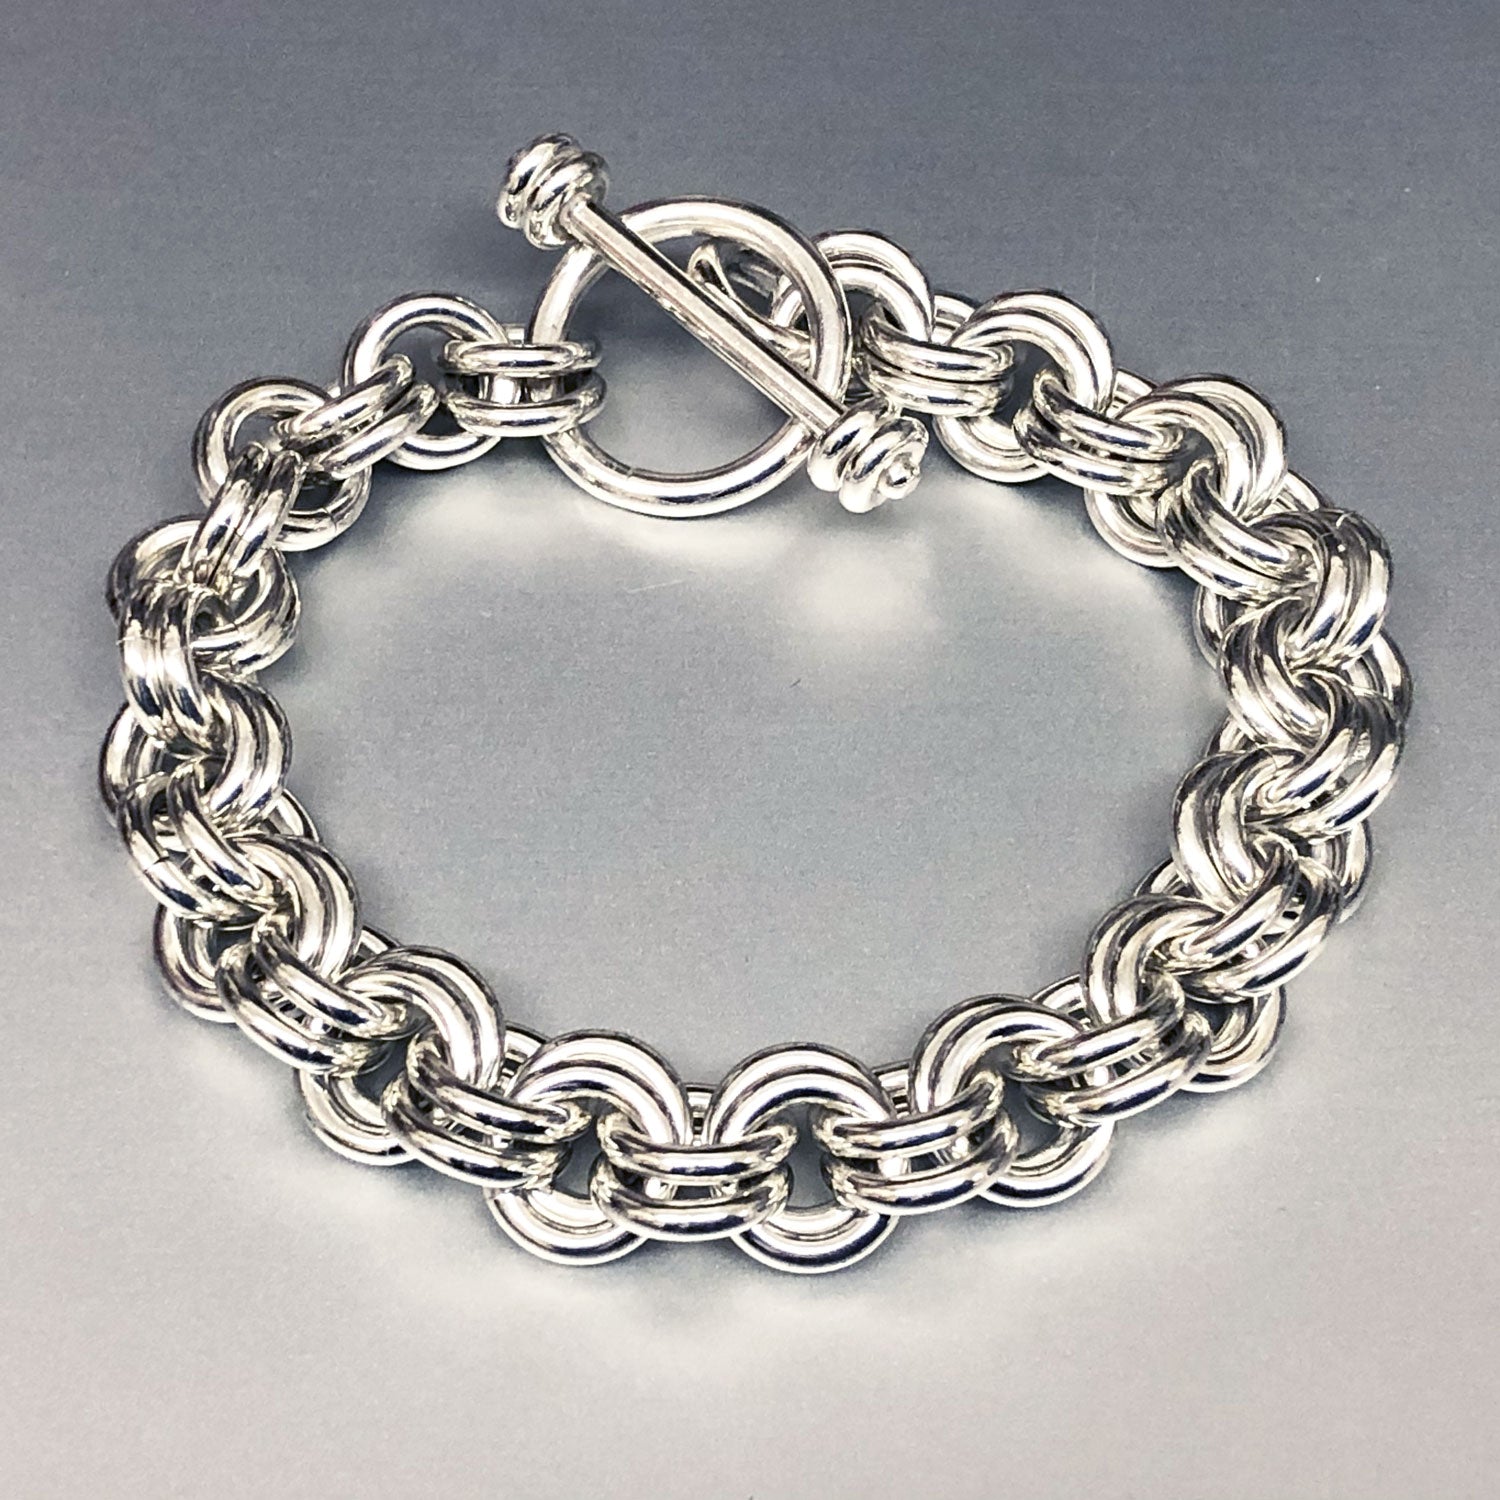 925 Sterling Silver Classic Watch Strap Chain Bracelet - Silver Palace